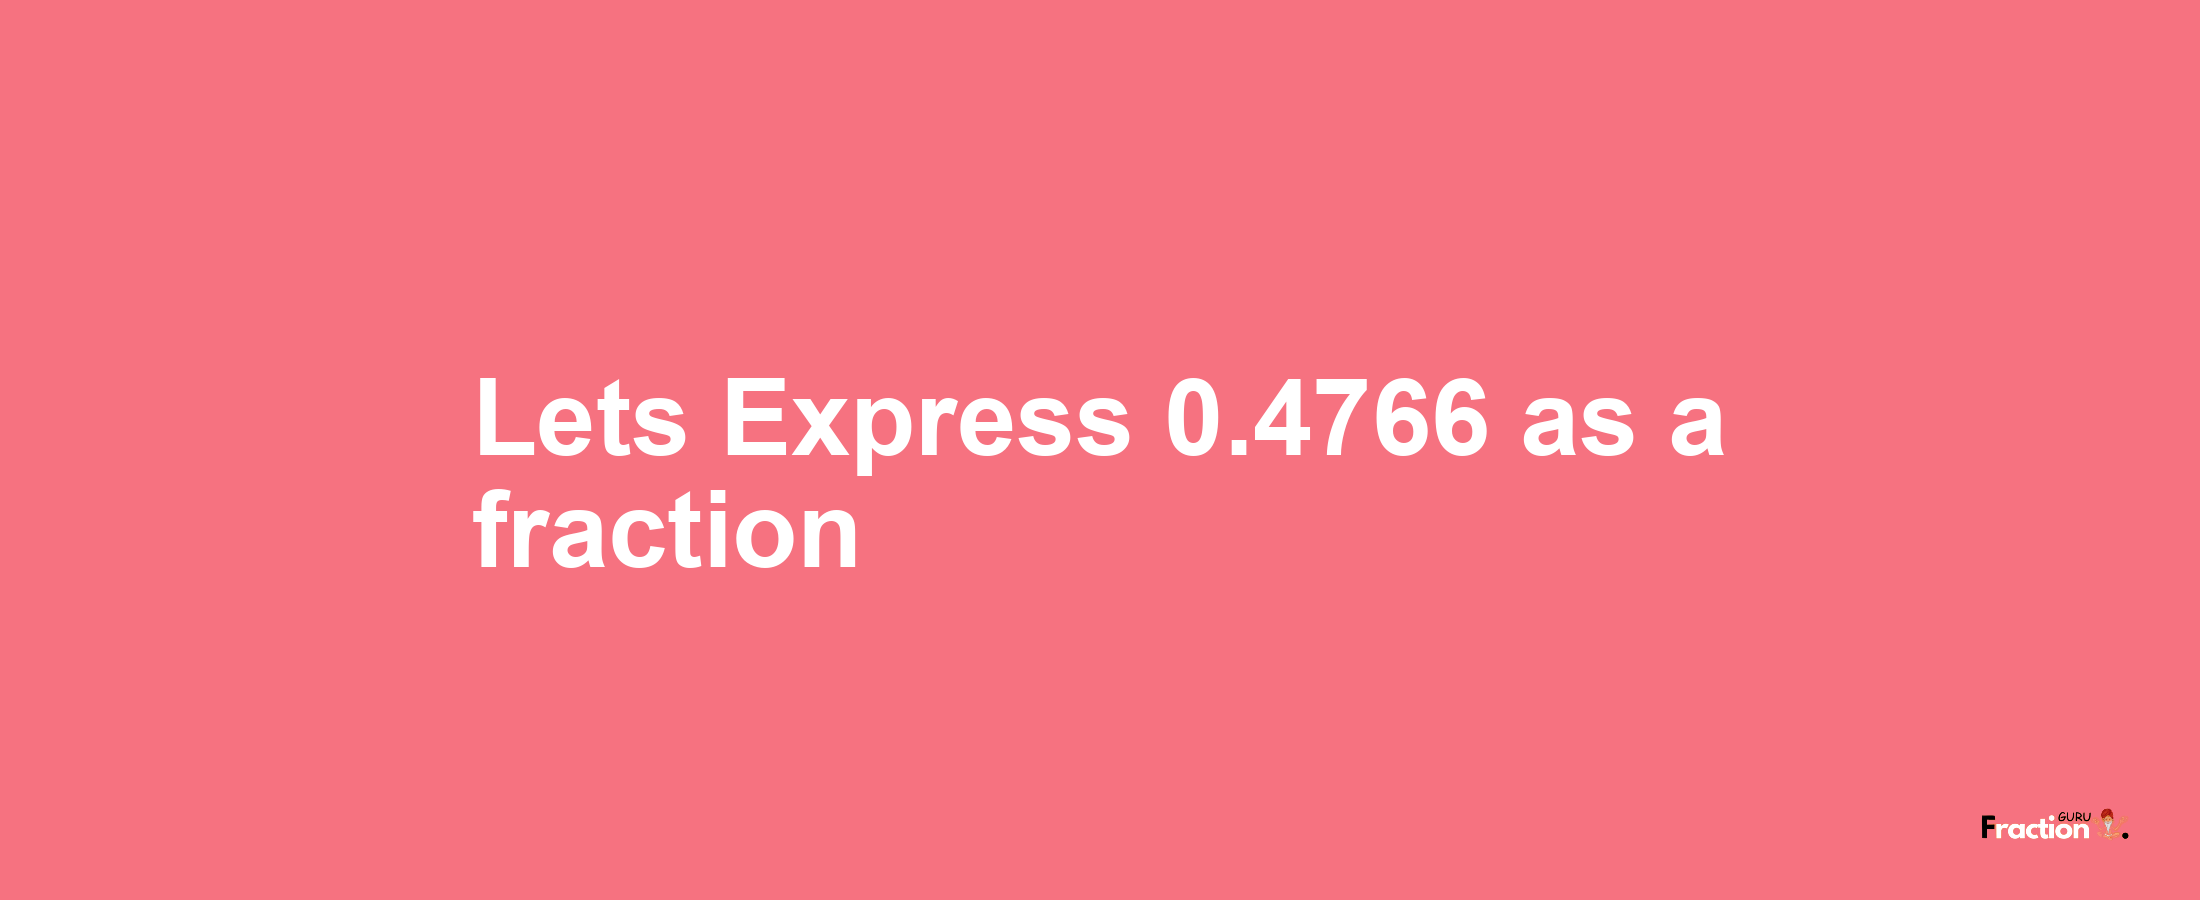 Lets Express 0.4766 as afraction